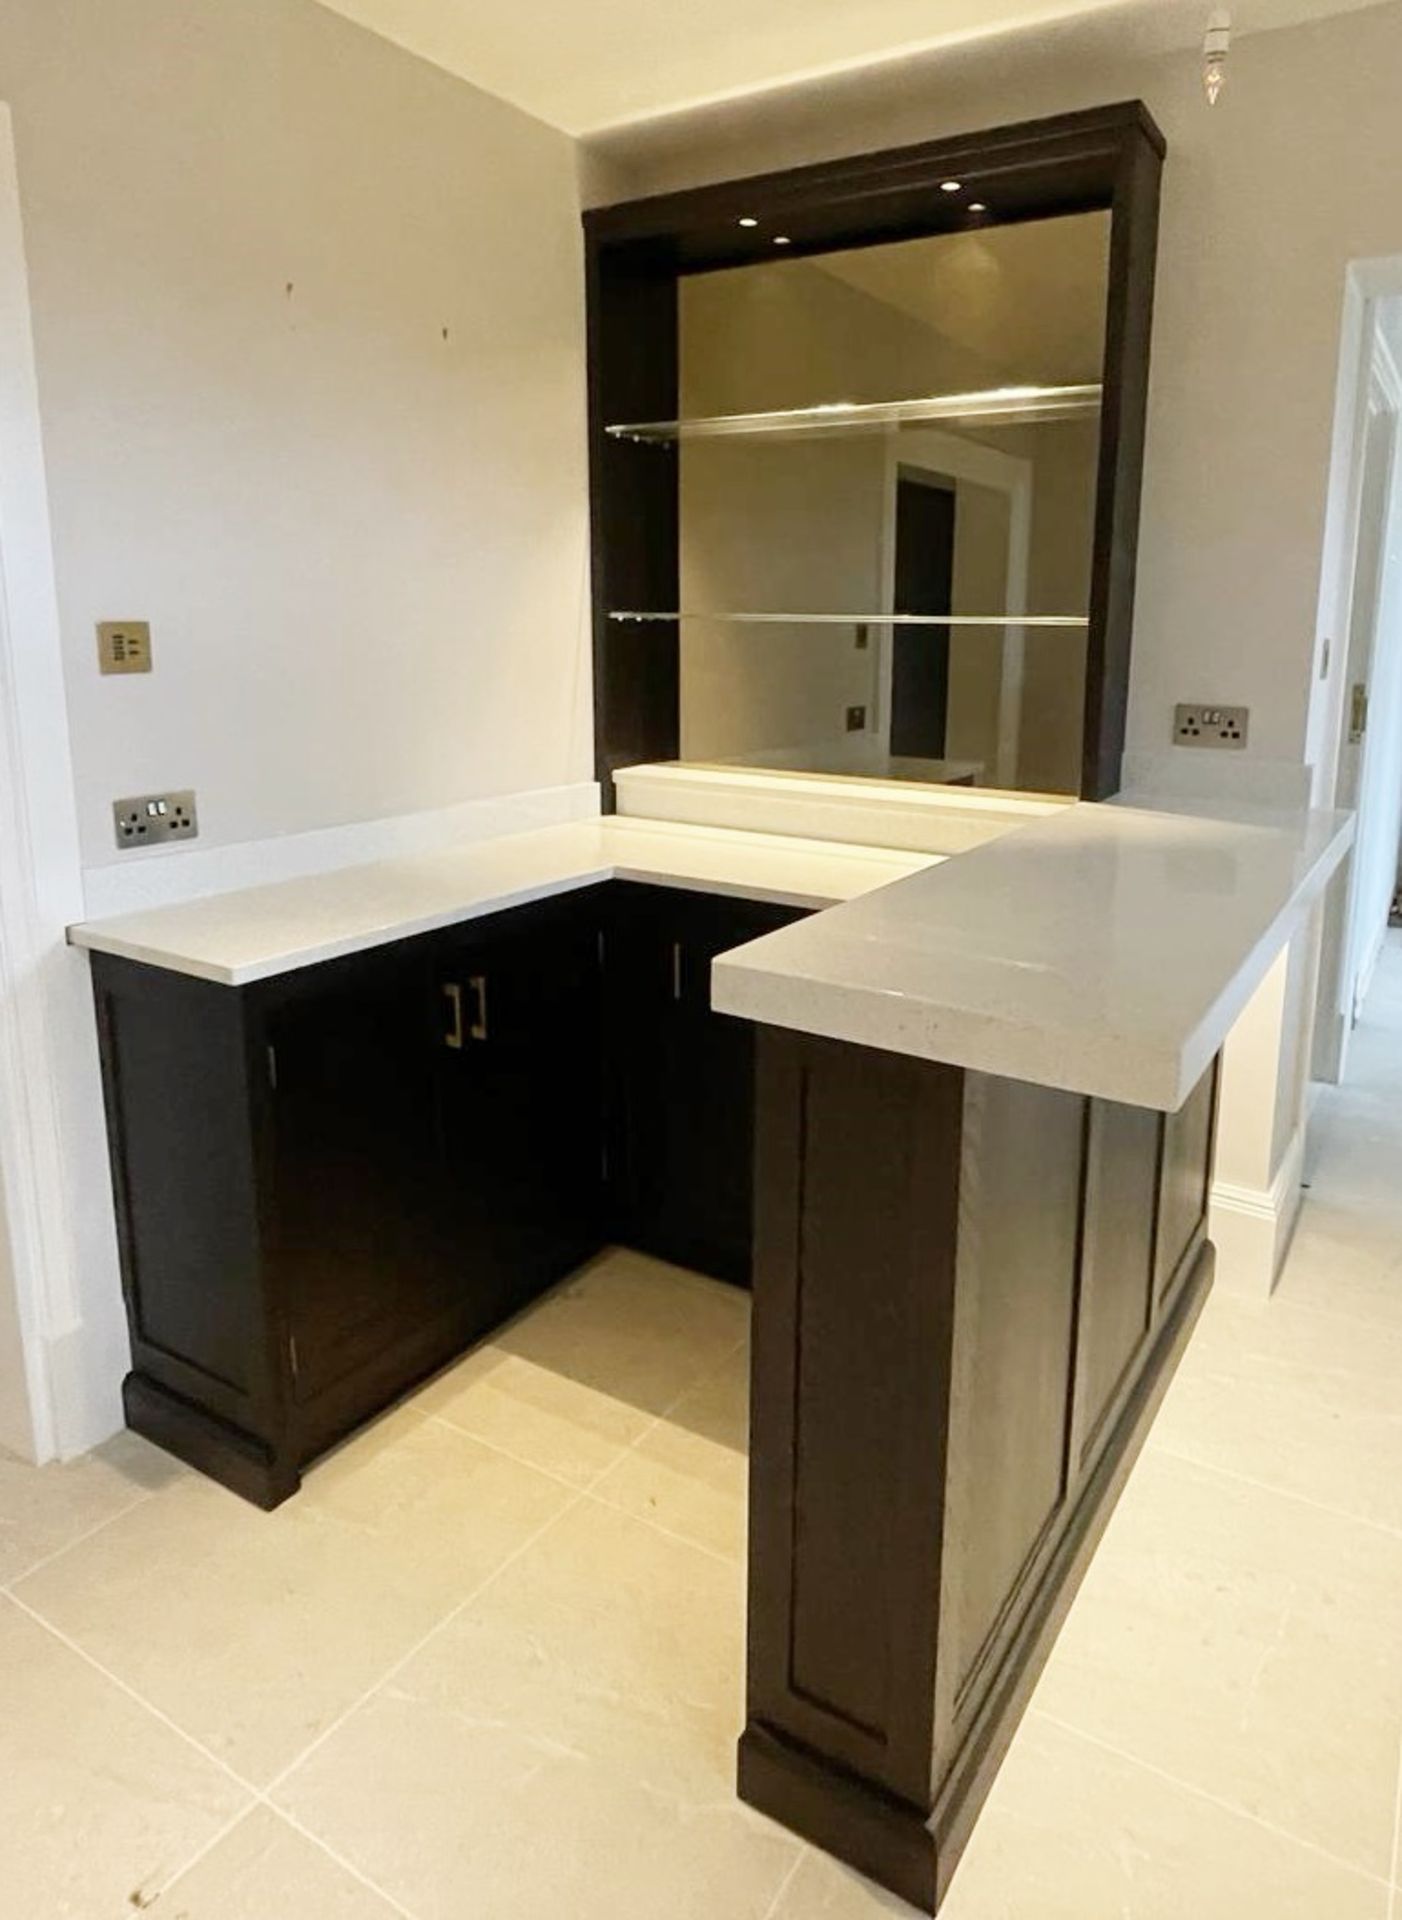 1 x Small Bespoke Fitted Luxury Home Bar with White Terrazzo Quartz Counter